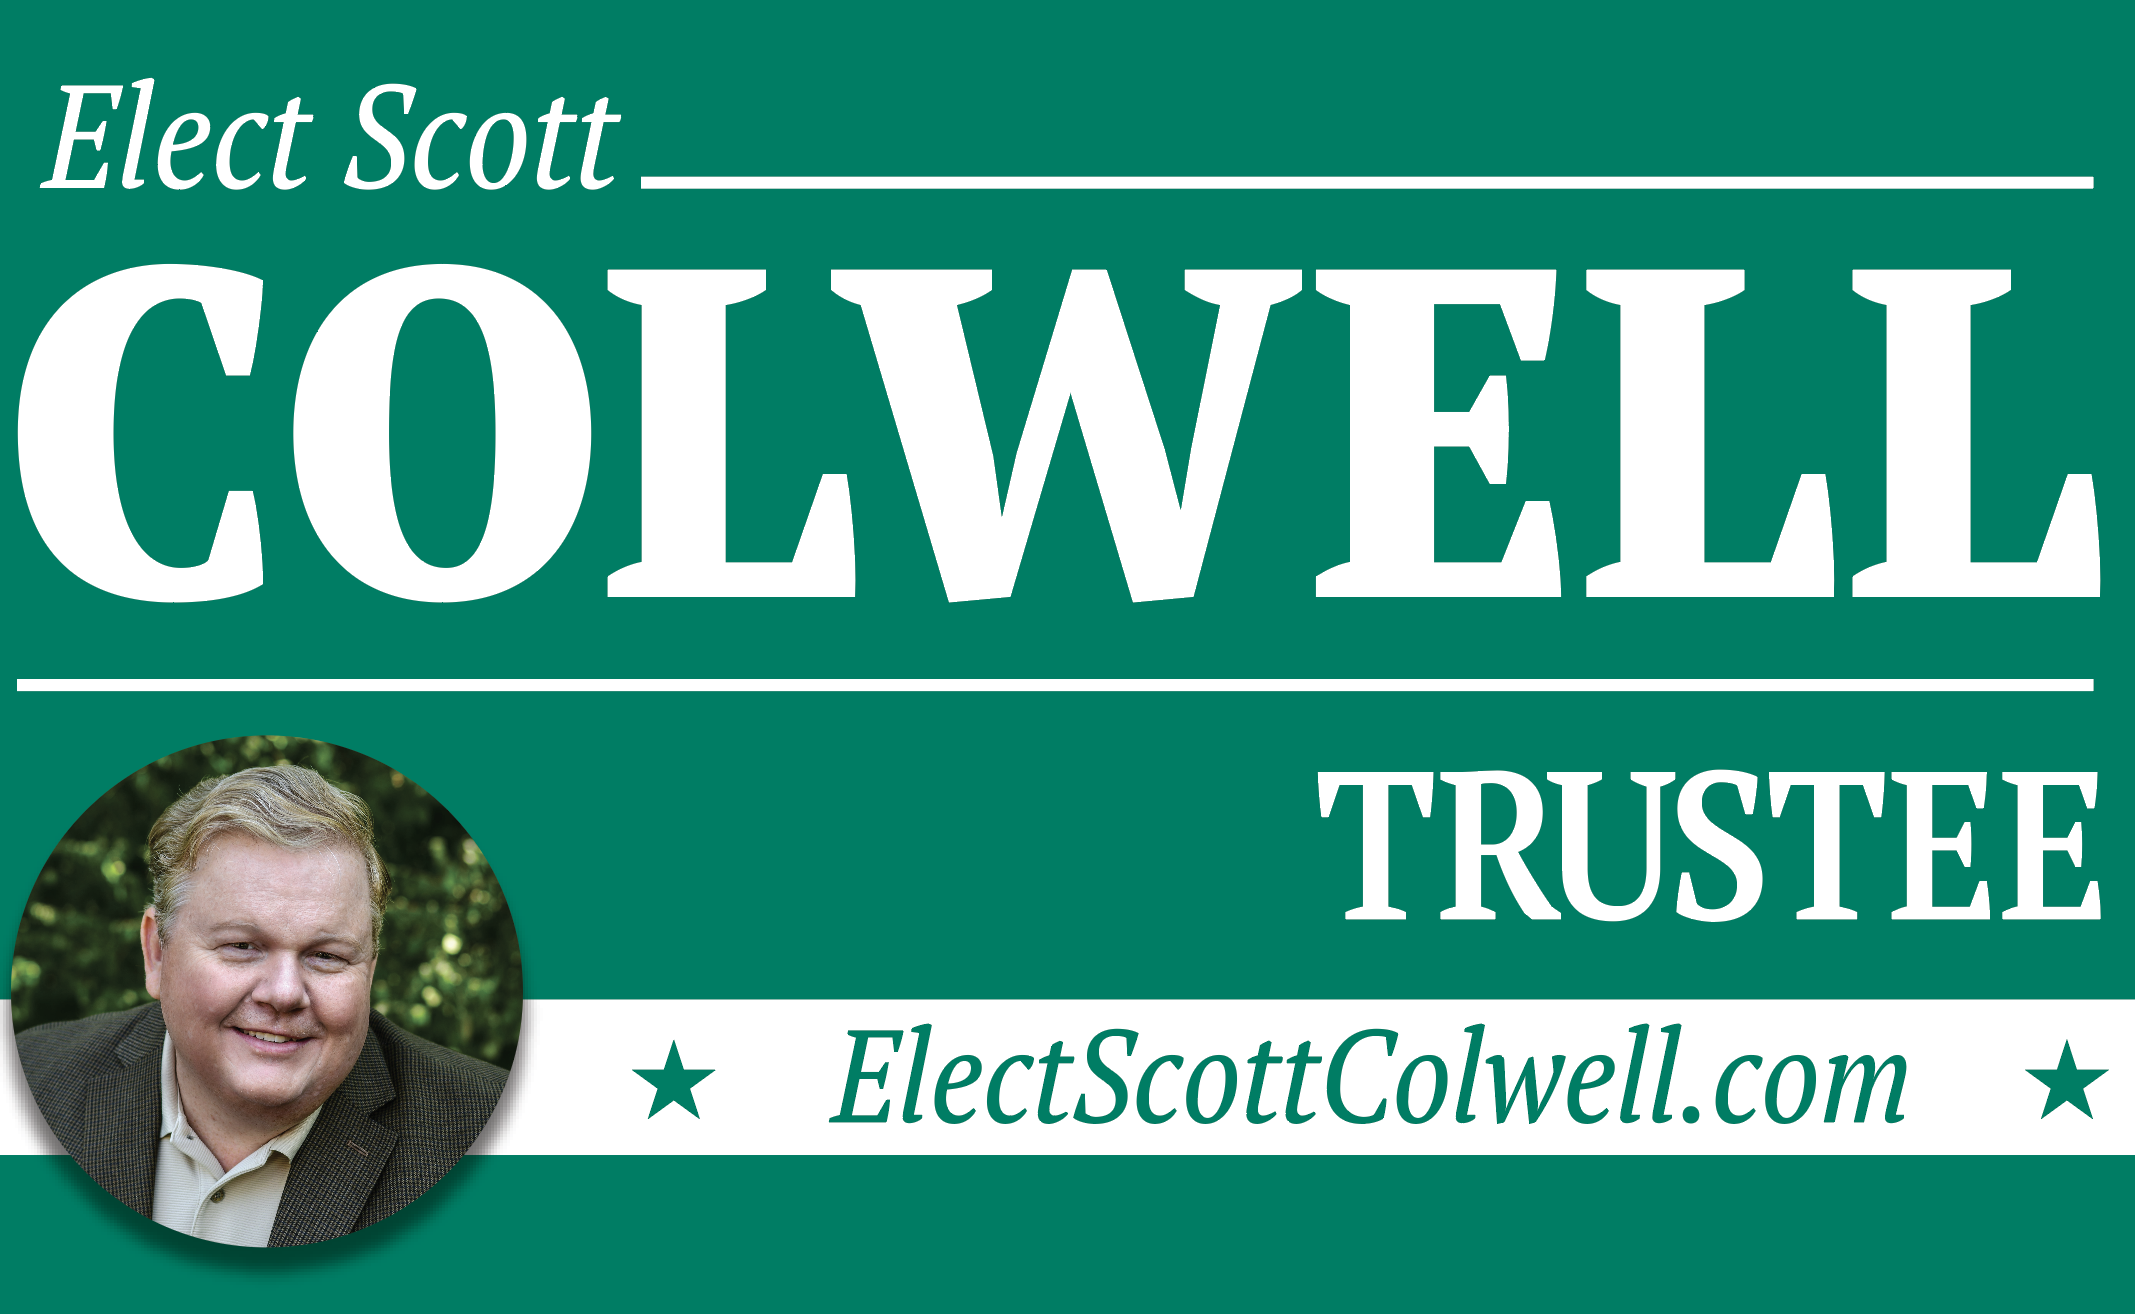 ElectScottColwell.com